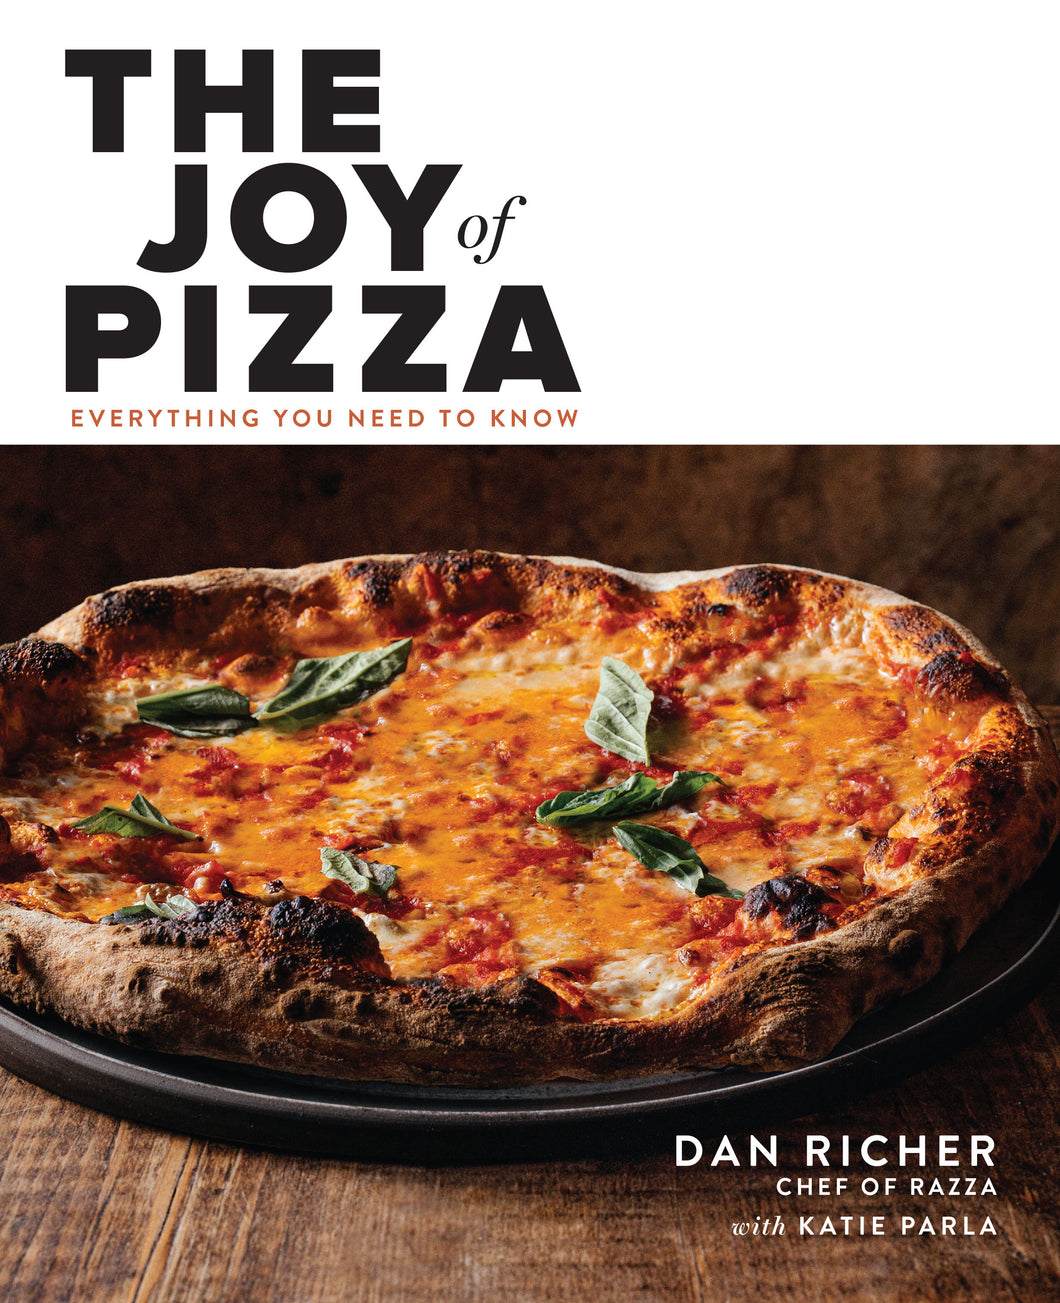 The Joy of Pizza: Everything You Need to Know by Dan Richer with Katie Parla